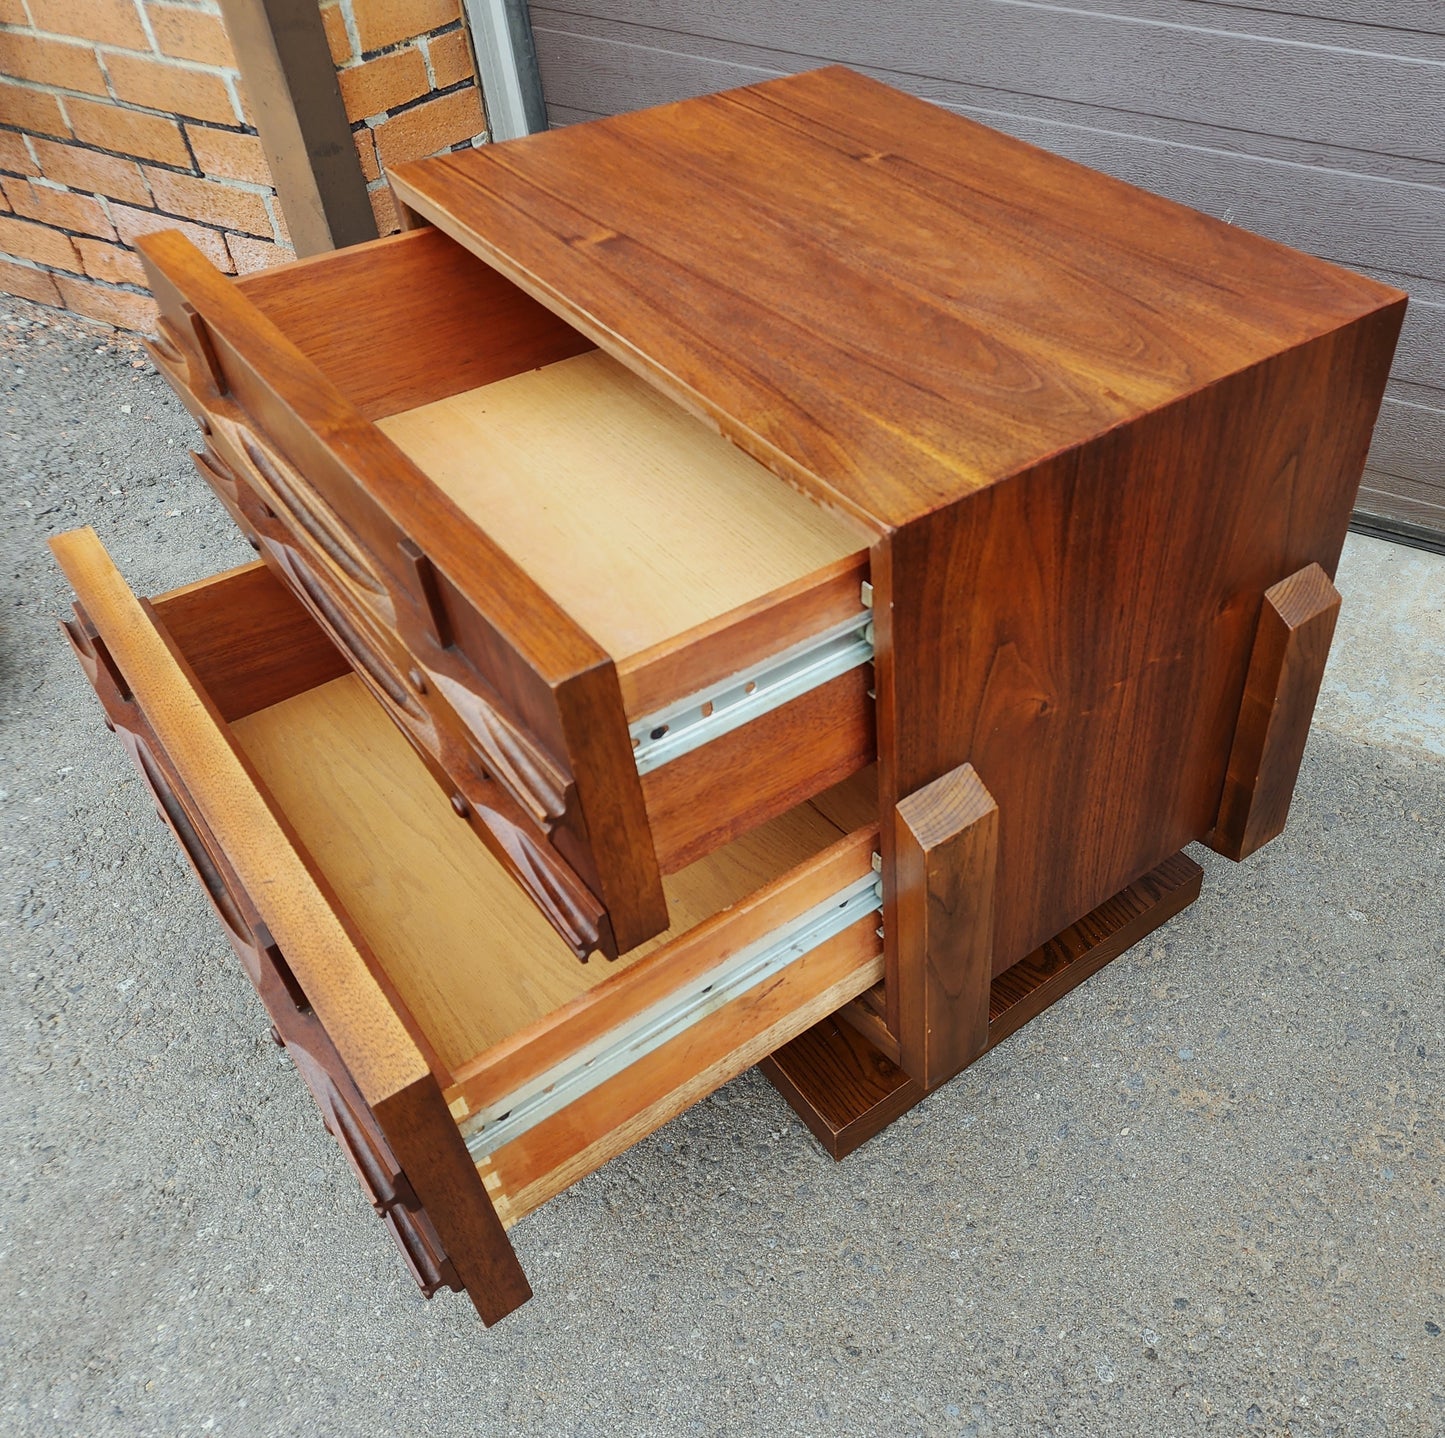 REFINISHED Rare Mid Century Modern Walnut Brutalist Nightstands or End Tables